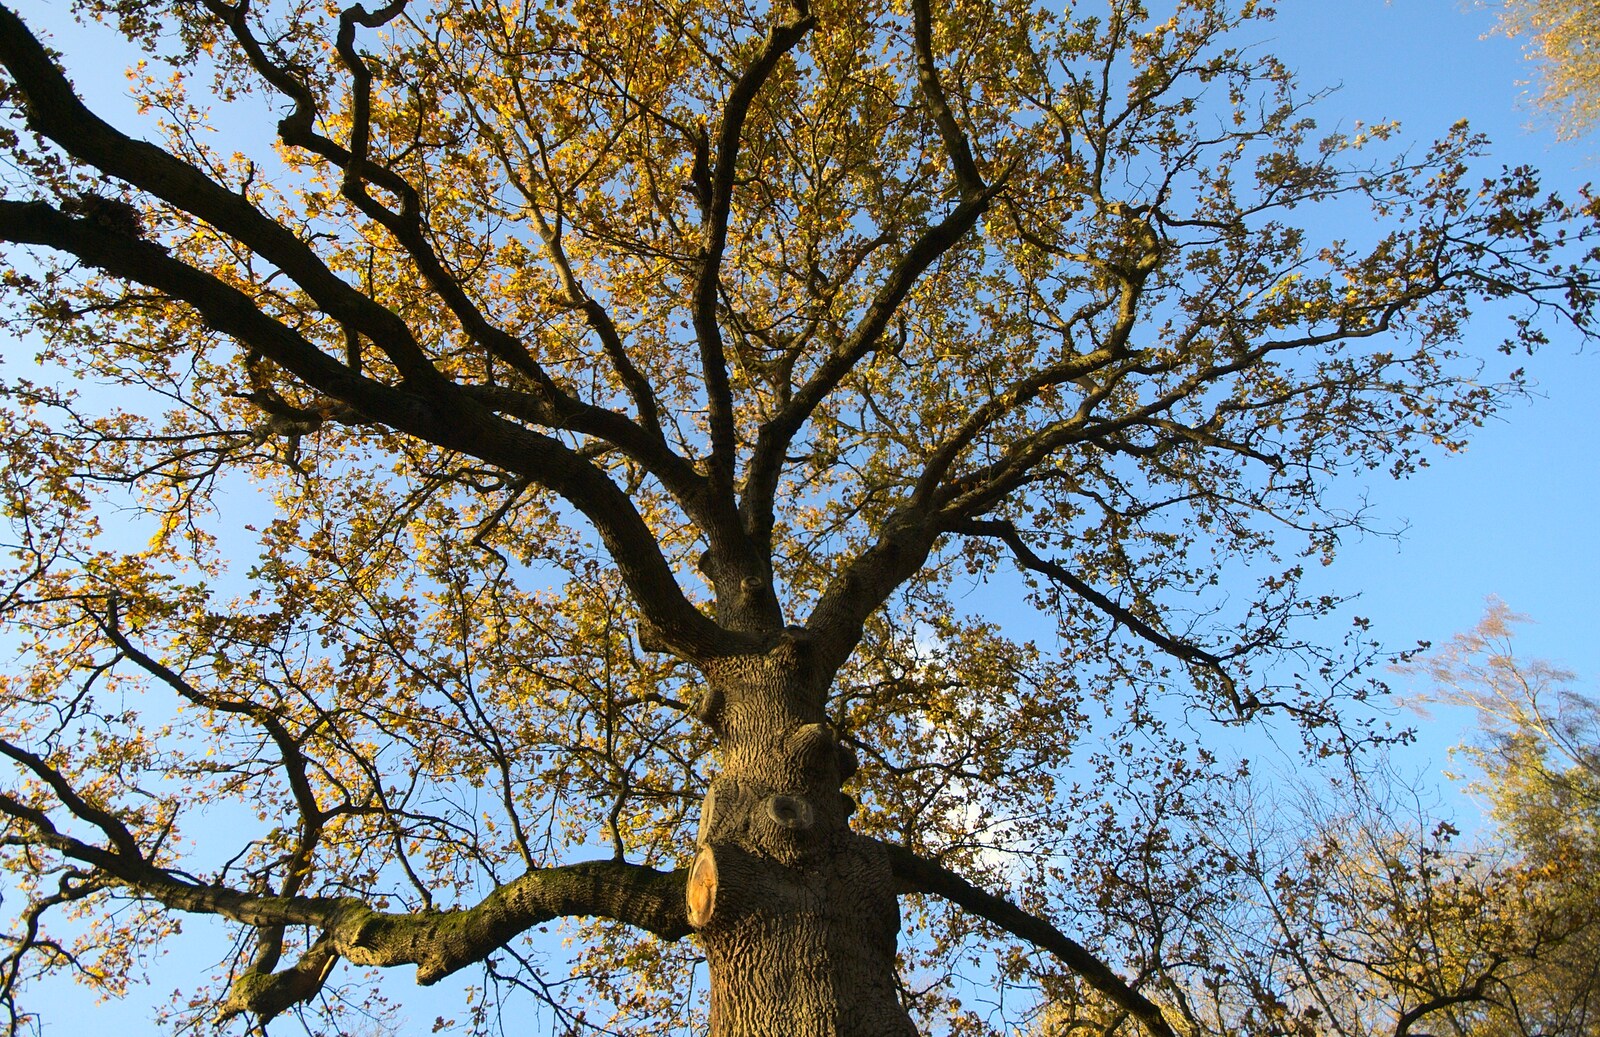 Big autumn tree from The NCT Sale and a Walk in the Woods, Bressingham and Thornham, Norfolk and Suffolk - 27th November 2011